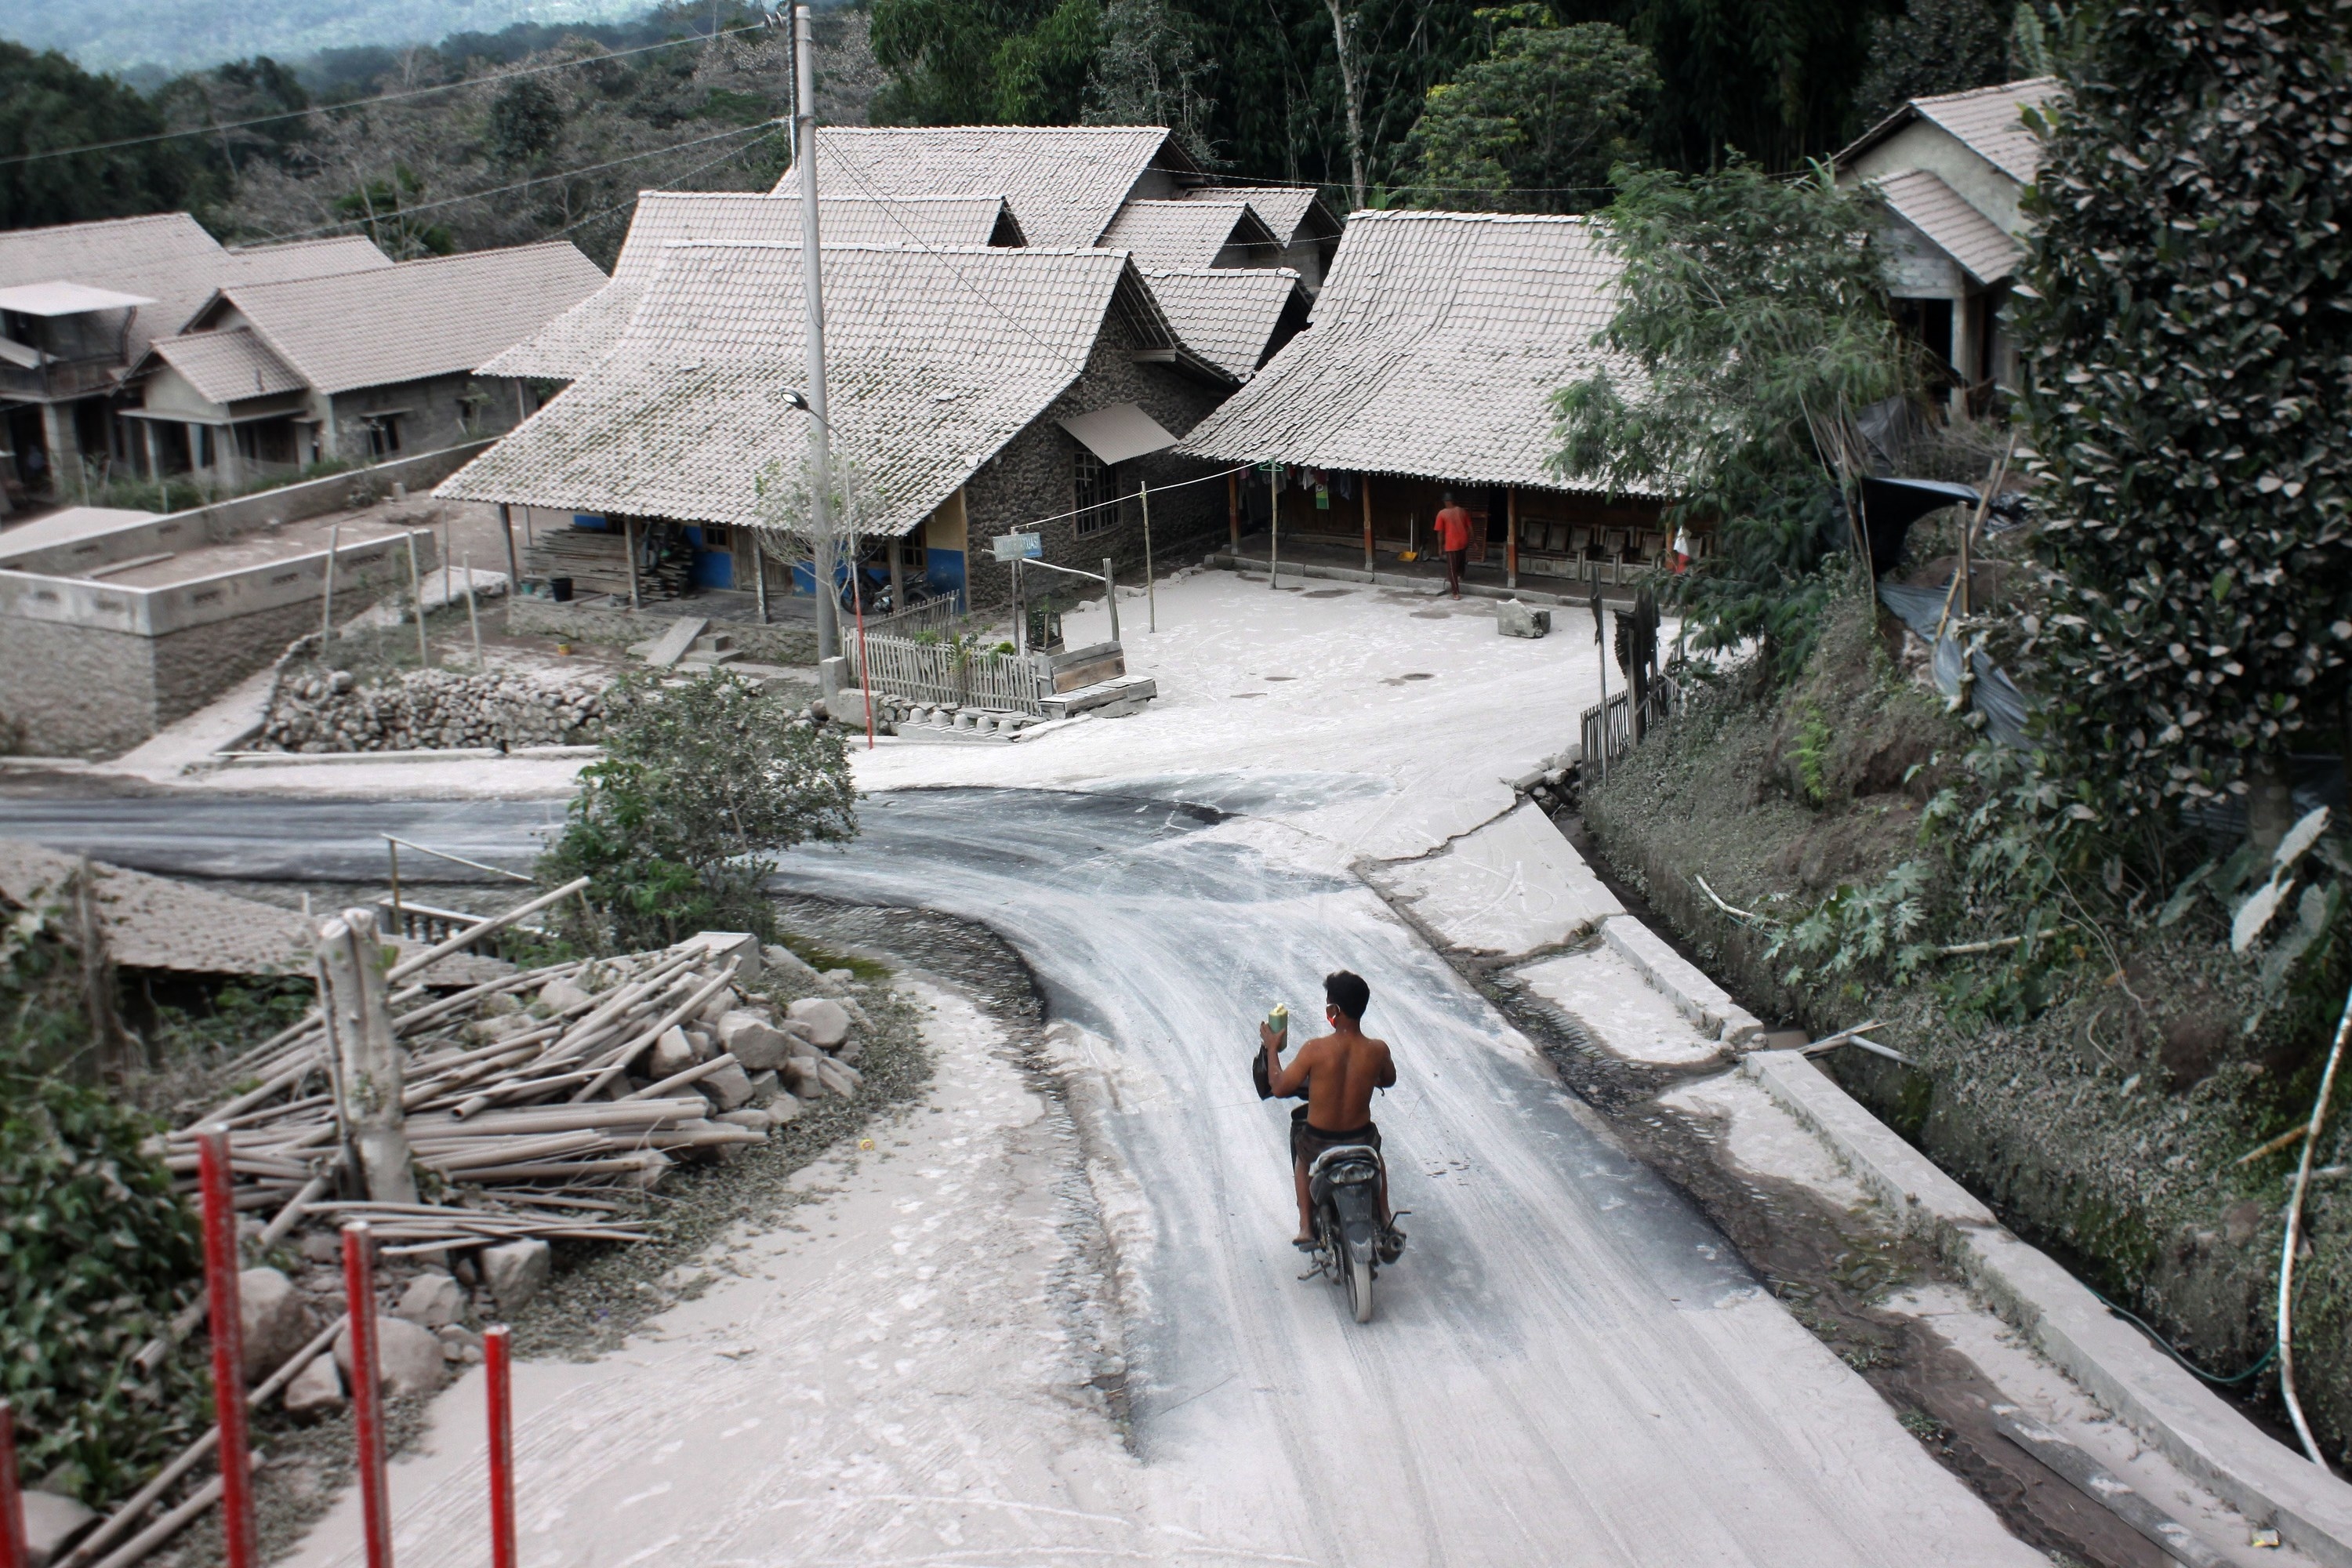 A man on a motorbike rides along a winding road in a residential area with houses covered in a blanket of volcanic ash